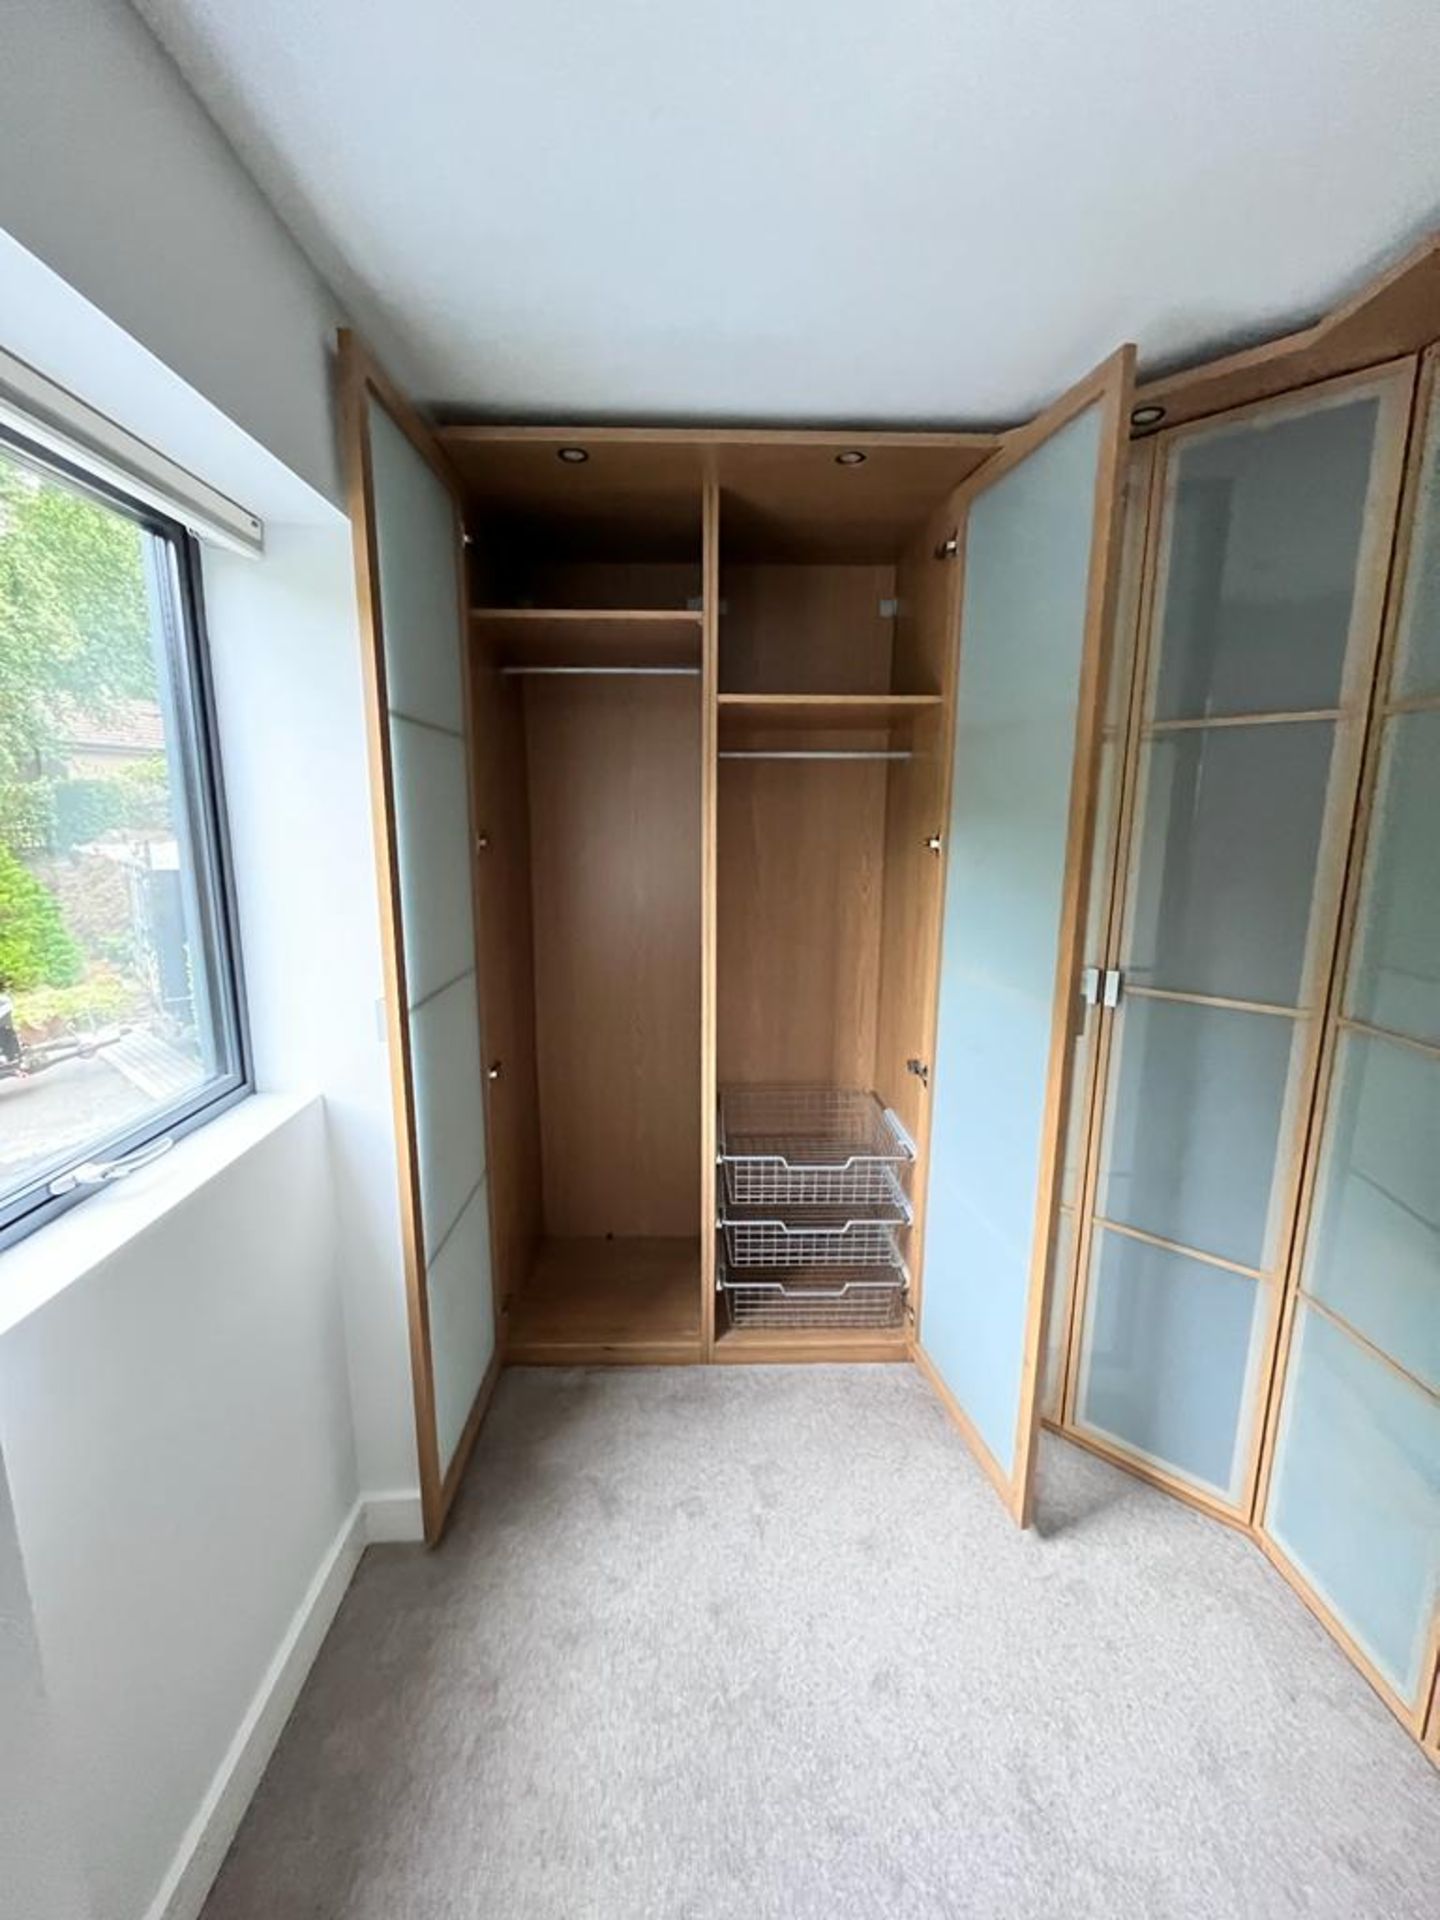 Large Bank Of Bespoke Fitted Master Bedroom Wardrobe Storage With Frosted Glass 8-Door Frontage - - Image 2 of 8